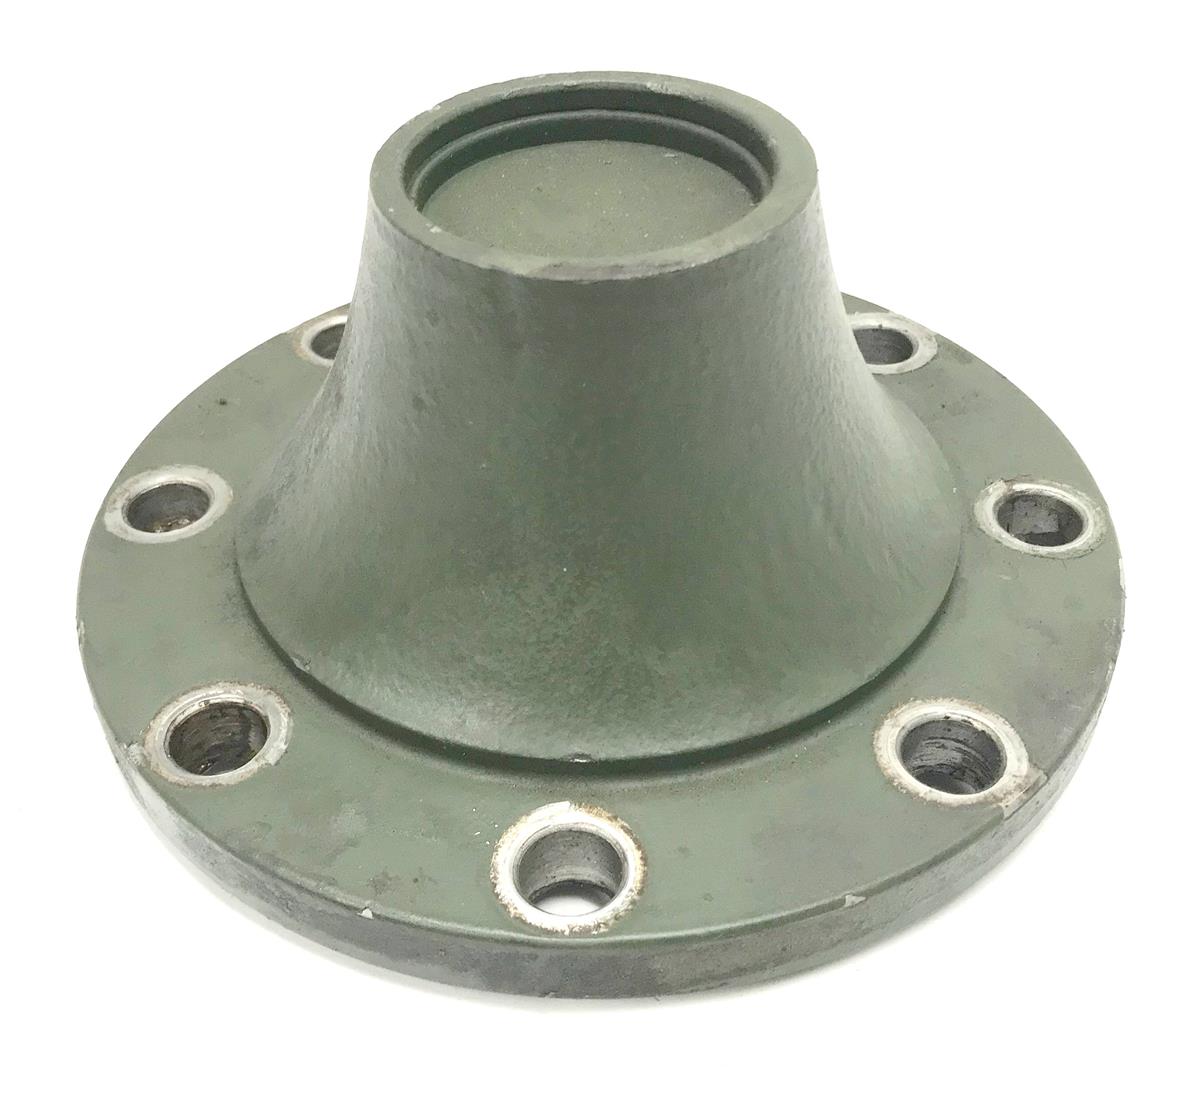 M35-719 | M35-719 M35 2.5 Ton Rockwell Front Axle Cap Cover (8).jpeg